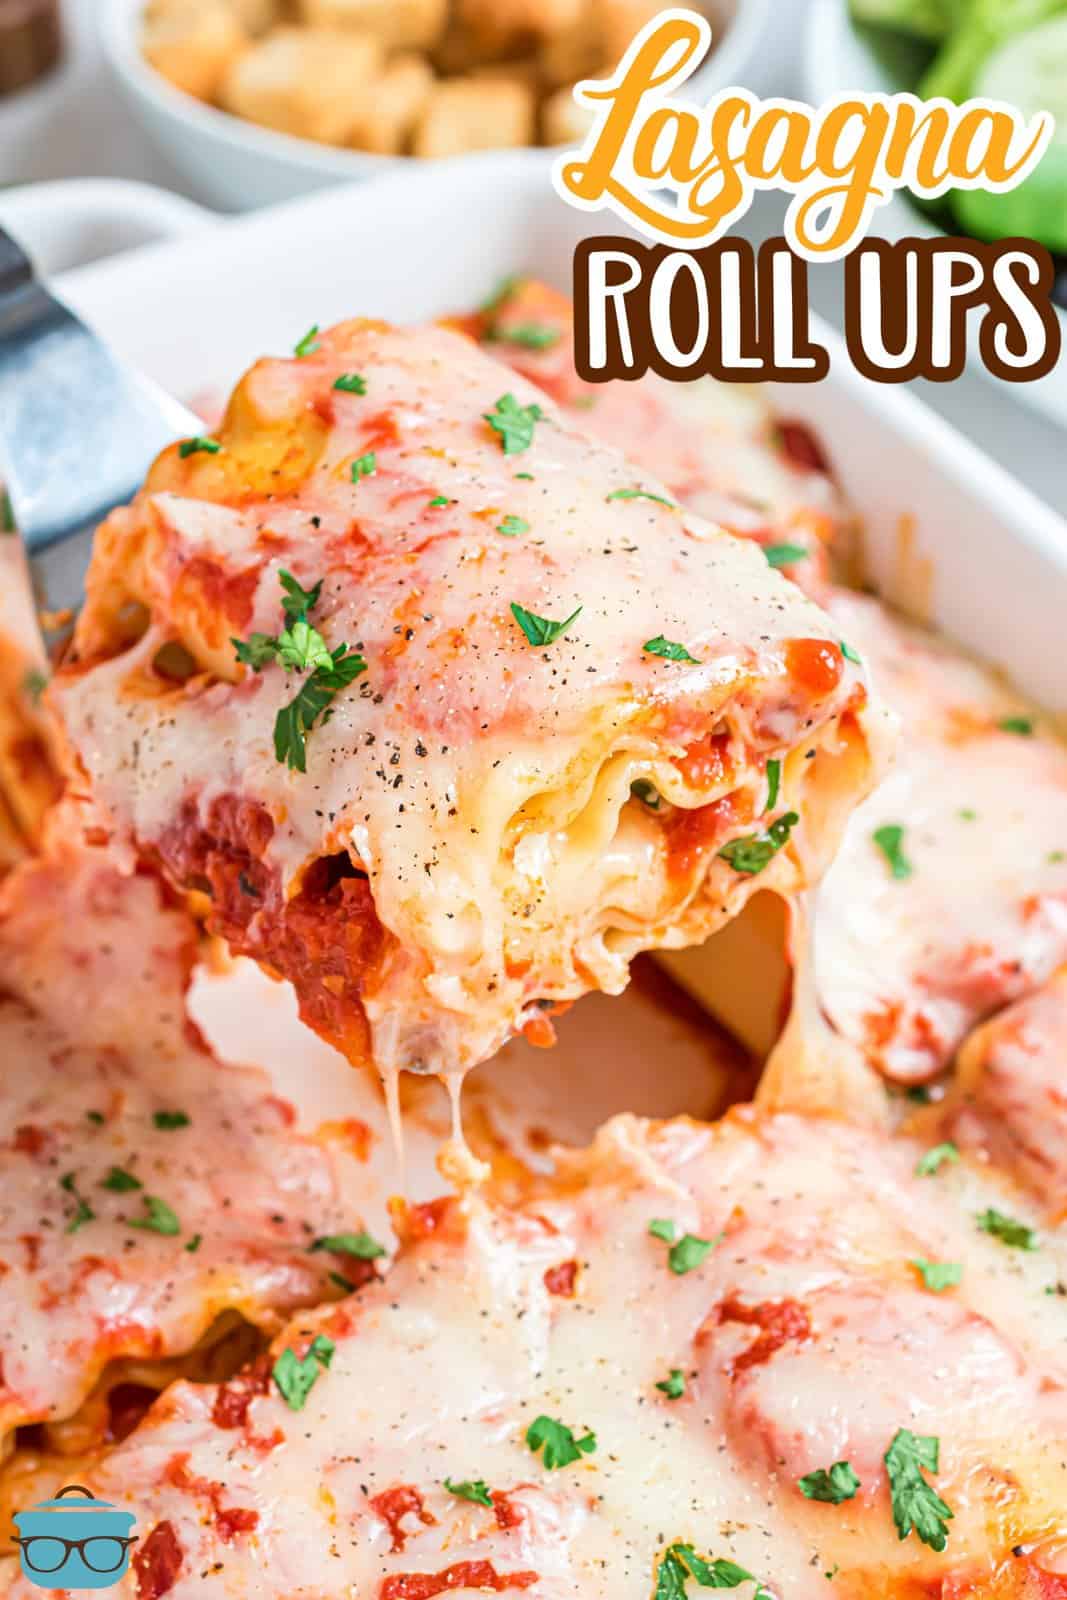 a spatula scooping up a lasagna rollup out of the baking dish.